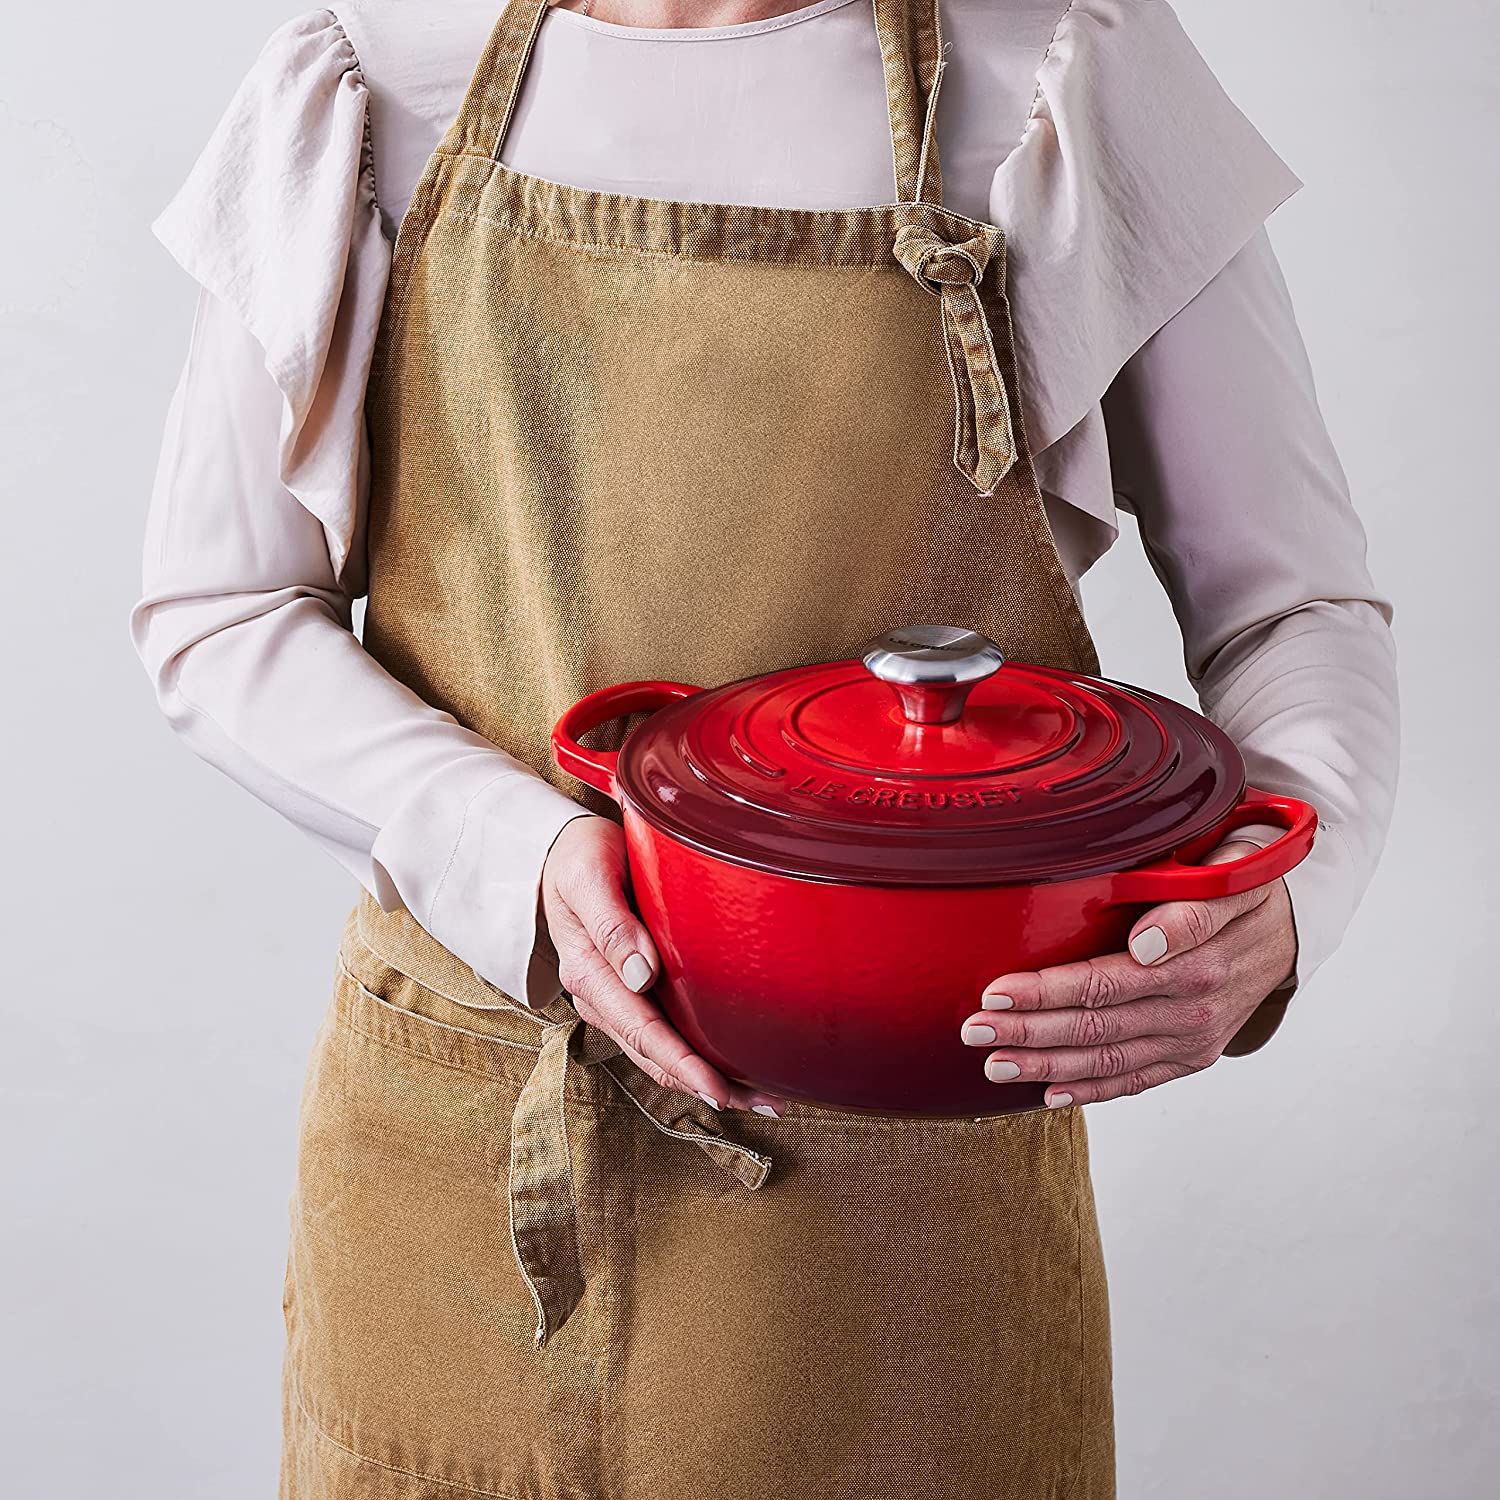 chef-holding-dutch-oven